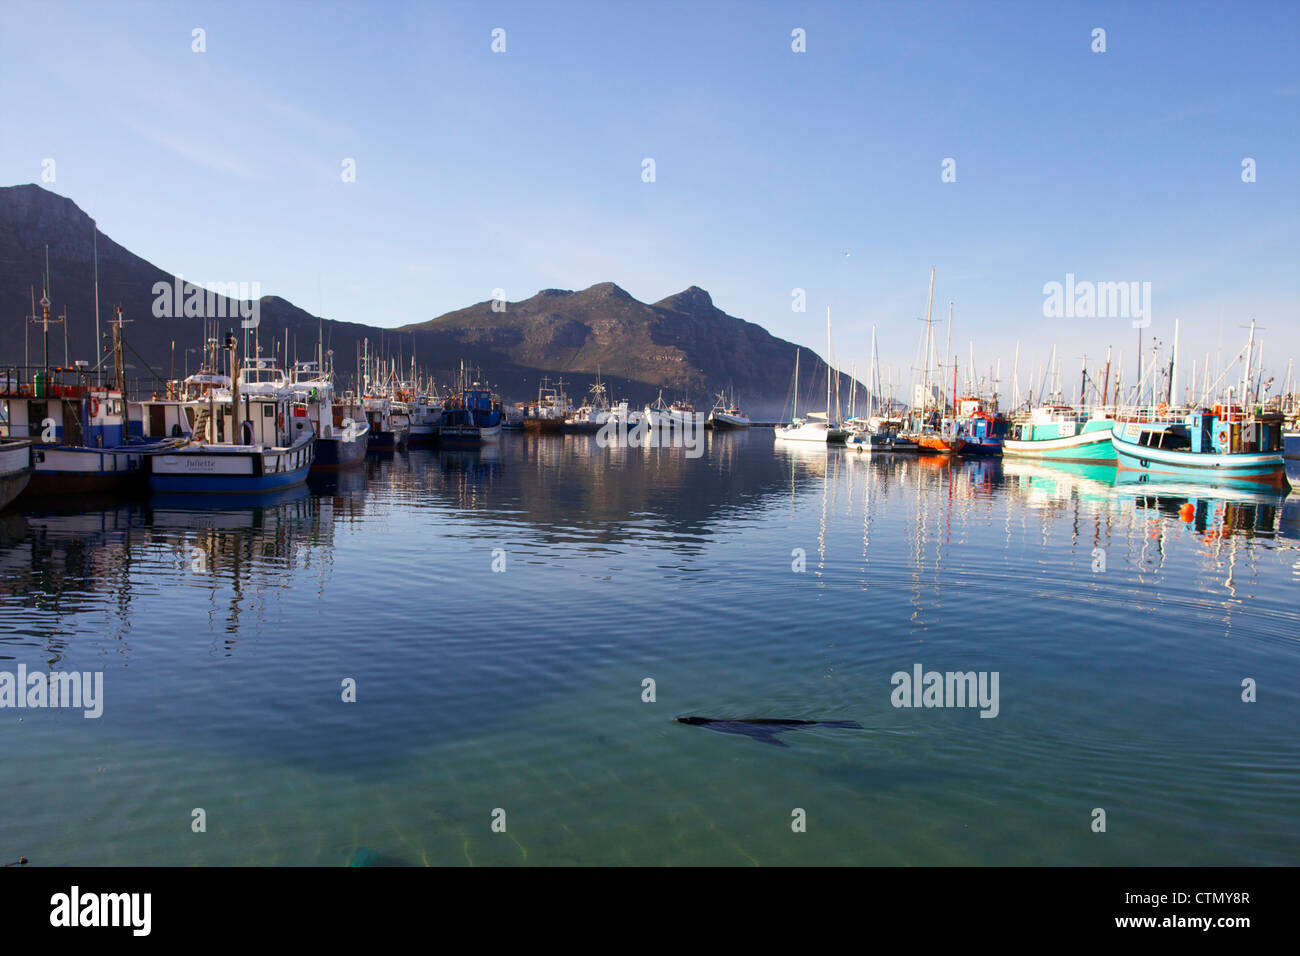 Boats and yachts docked in harbor at Hout Bay, Western Cape, South Africa Stock Photo